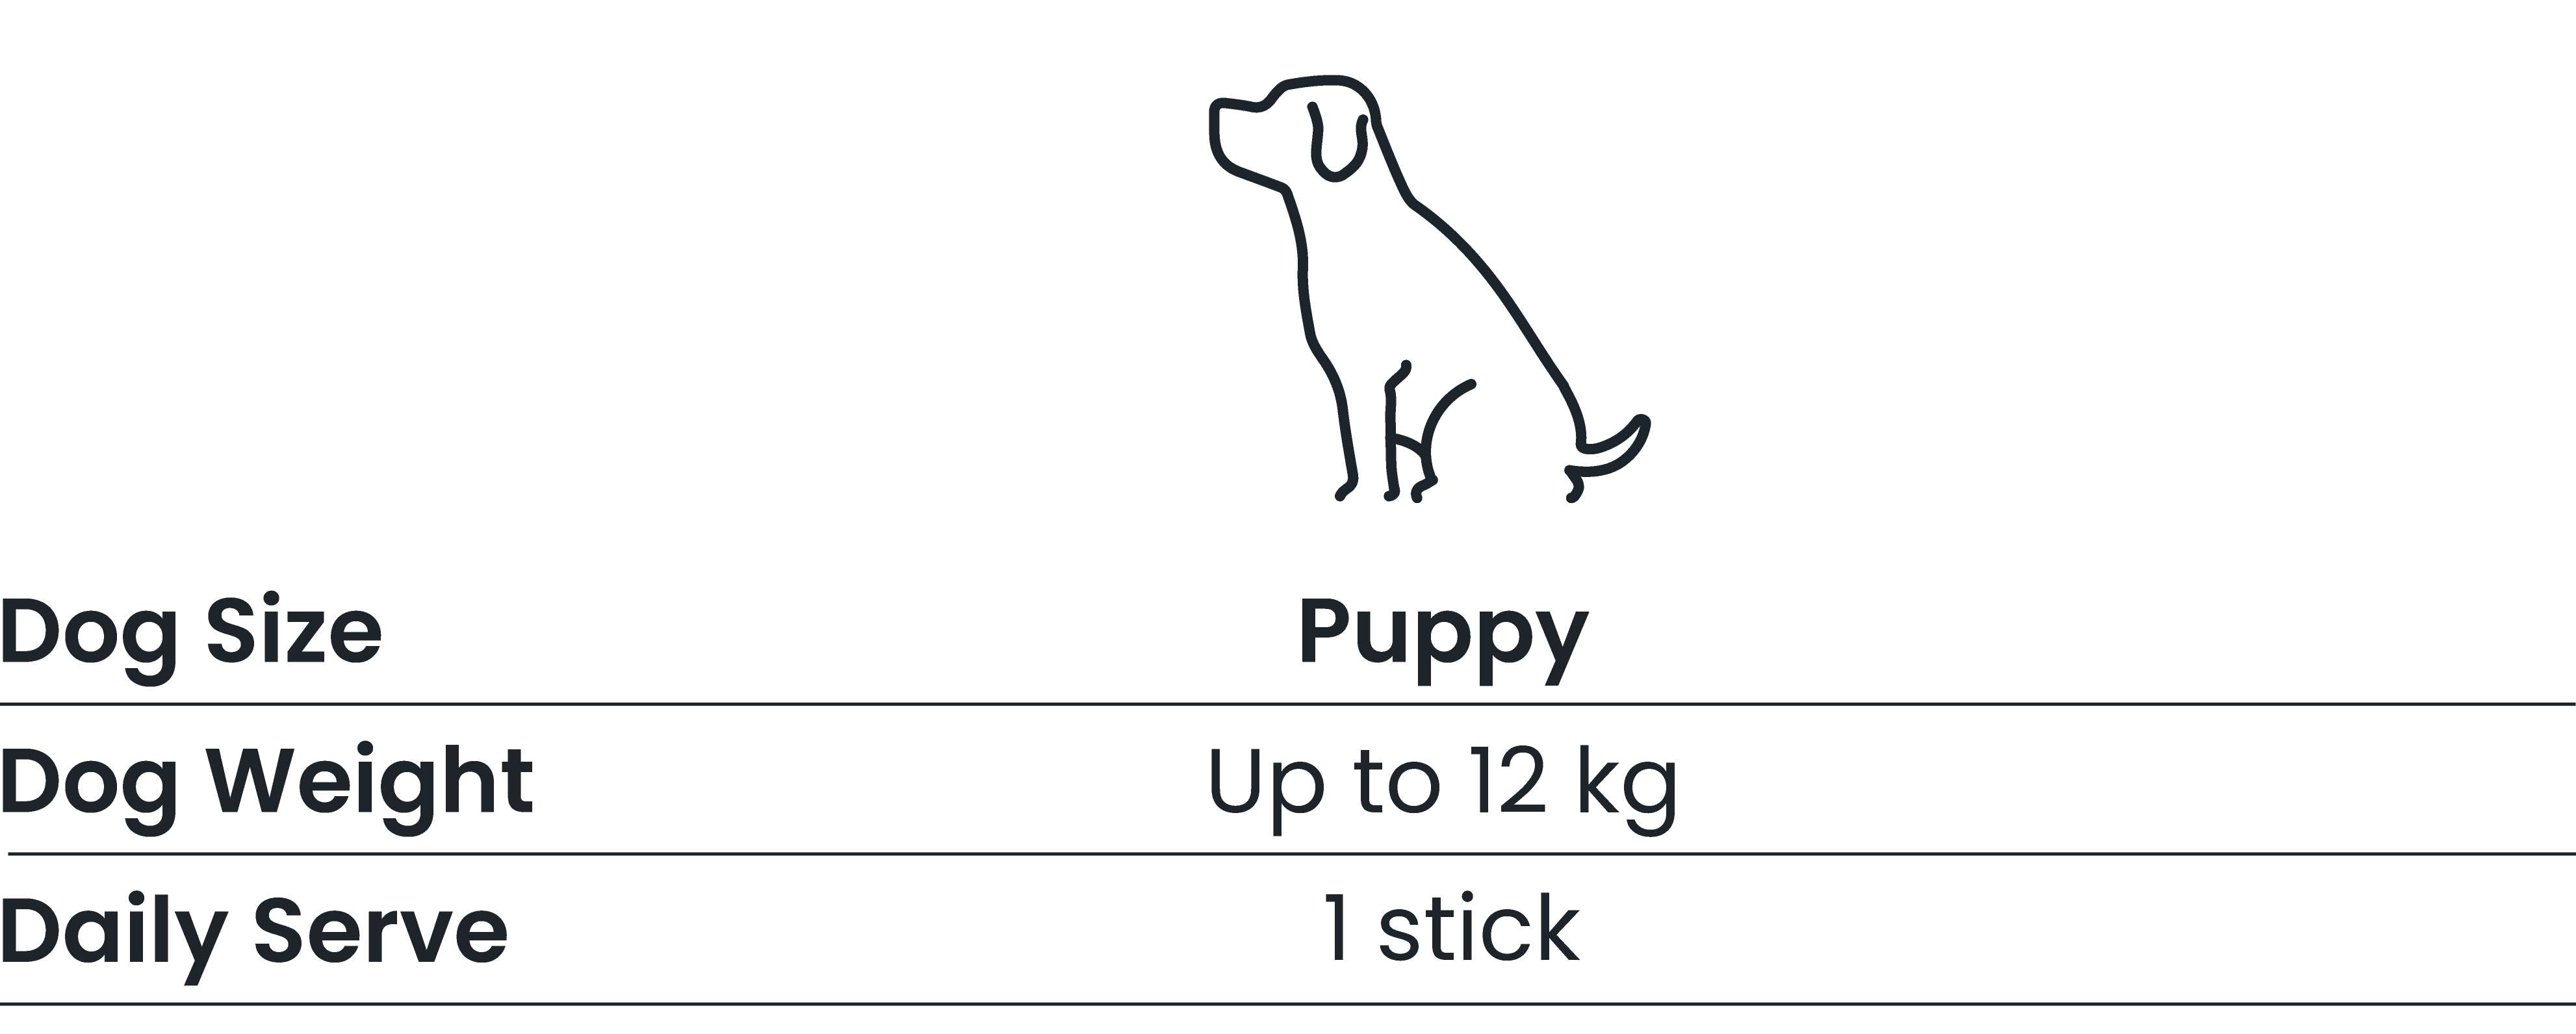 ZamiPet Dental Sticks feeding guide. For puppies up to 12kg, one stick per day.